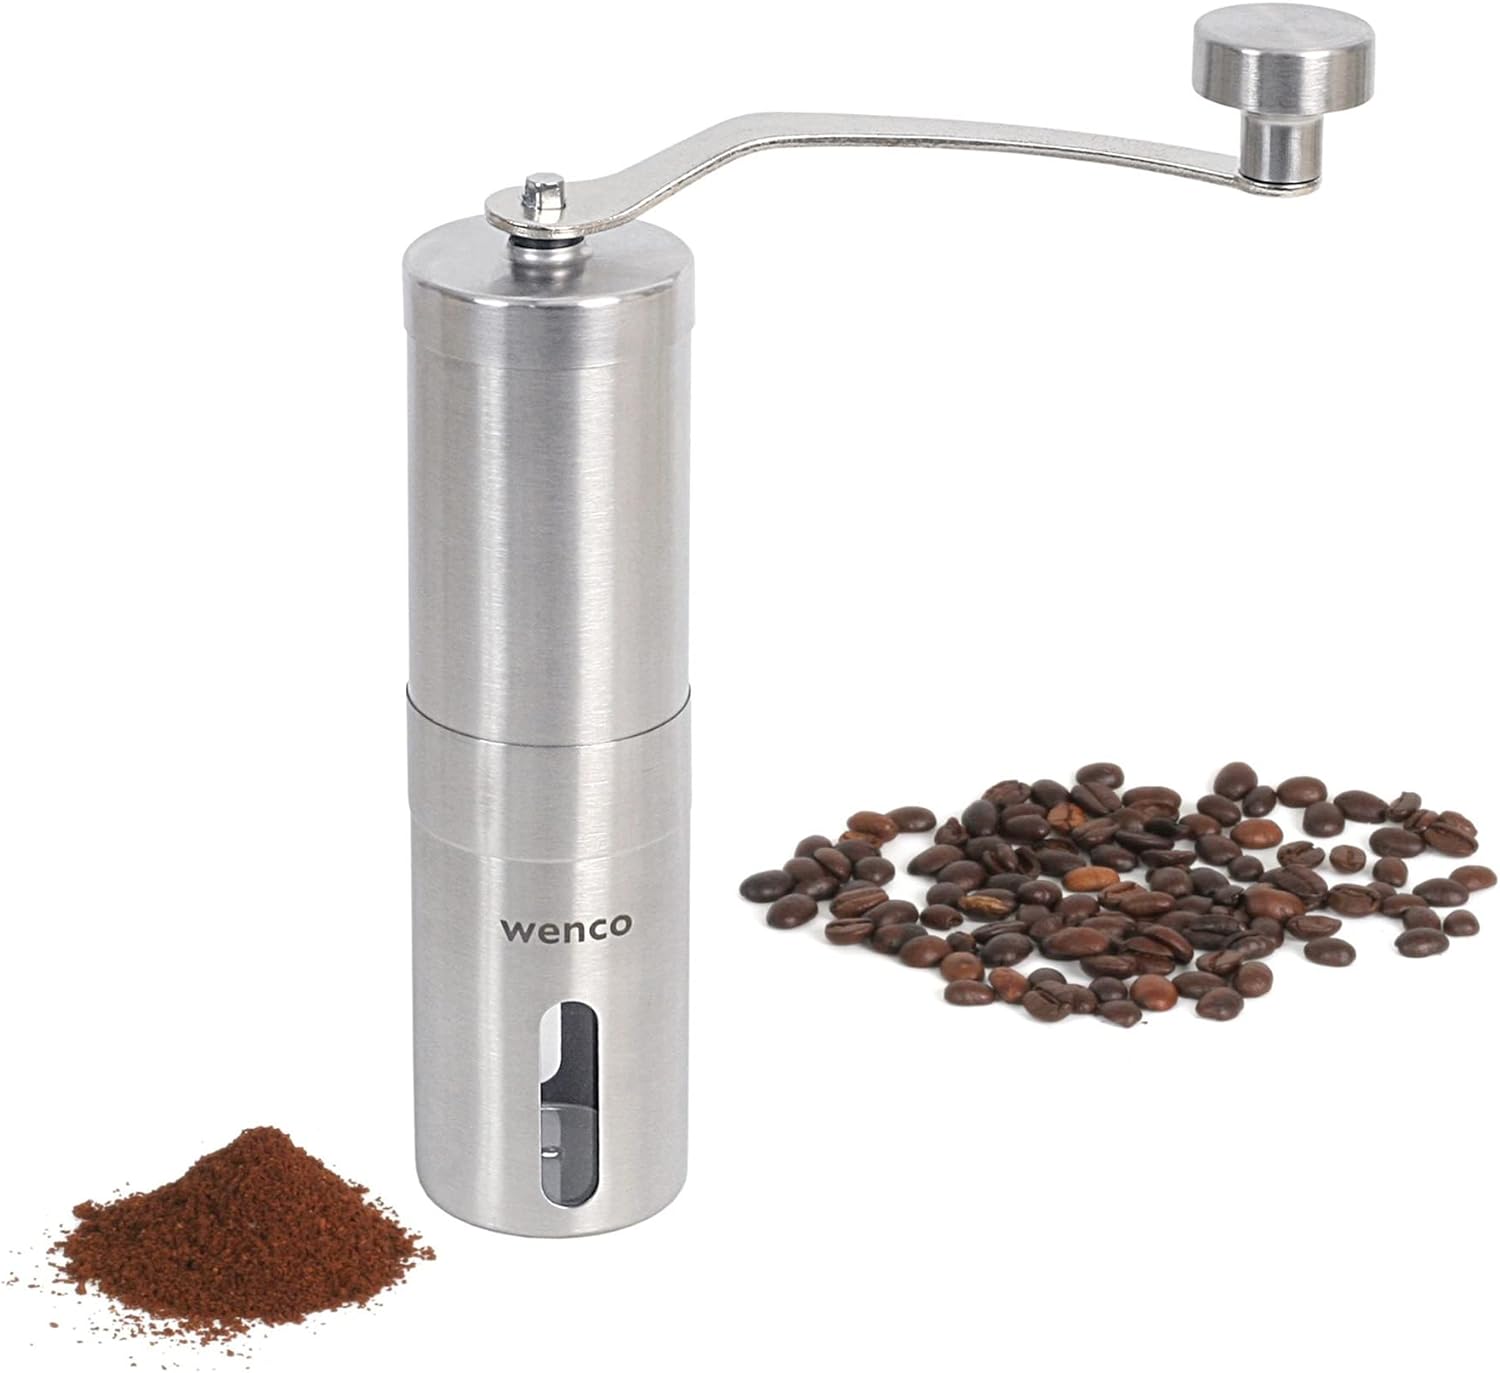 Wenco Premium Manual Coffee Grinder, Can Be Used as Espresso Grinder and Coffee Grinder, Adjustable Grinding Level, 16.5 x 4.5 x 22 cm, Stainless Steel, Silver